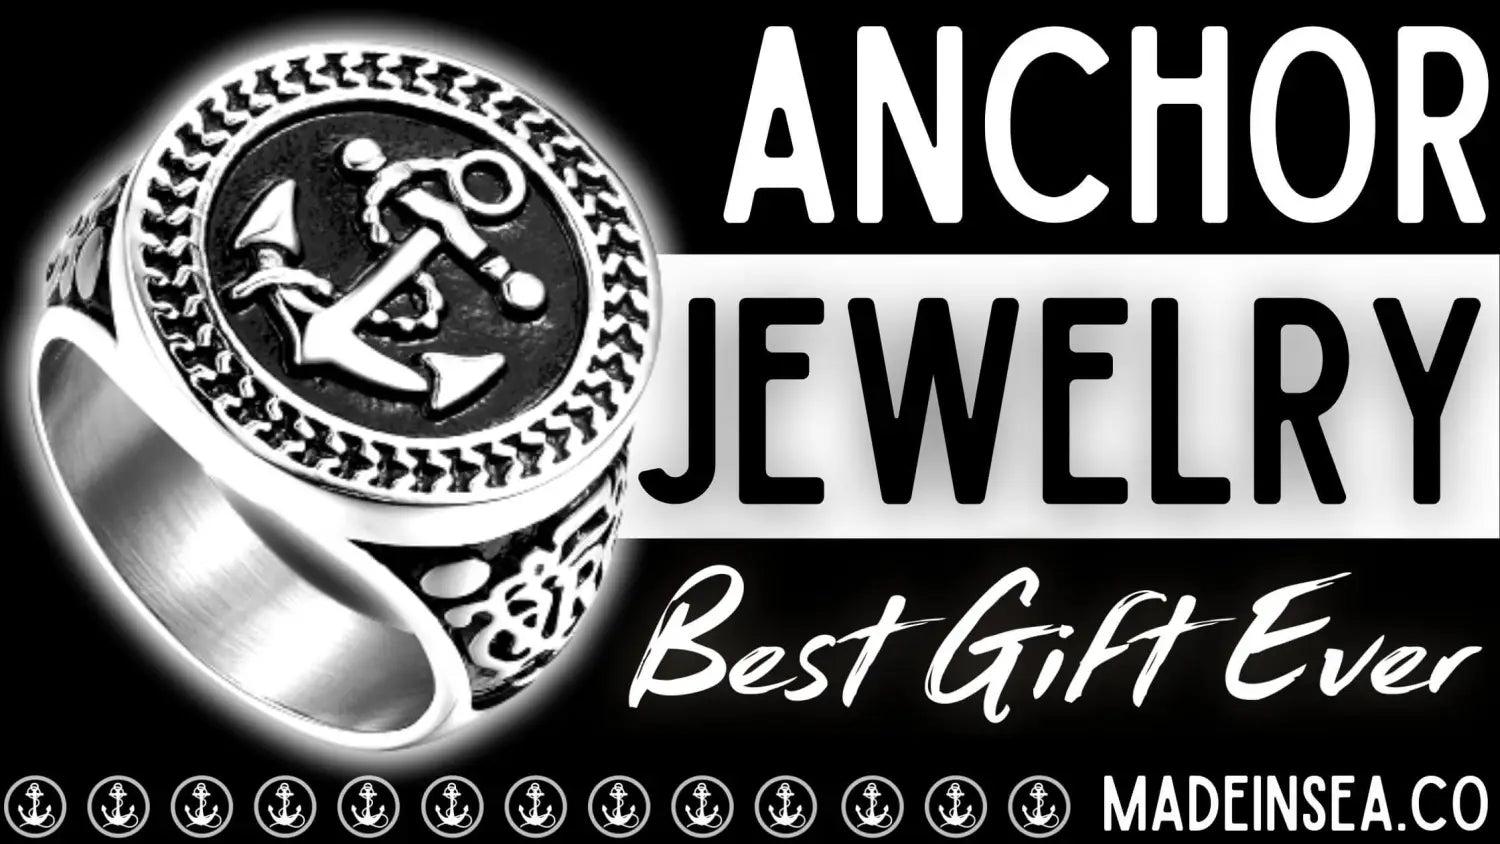 gift-offer-anchor-jewelry-ring-necklace-pendant-bracelet-watches